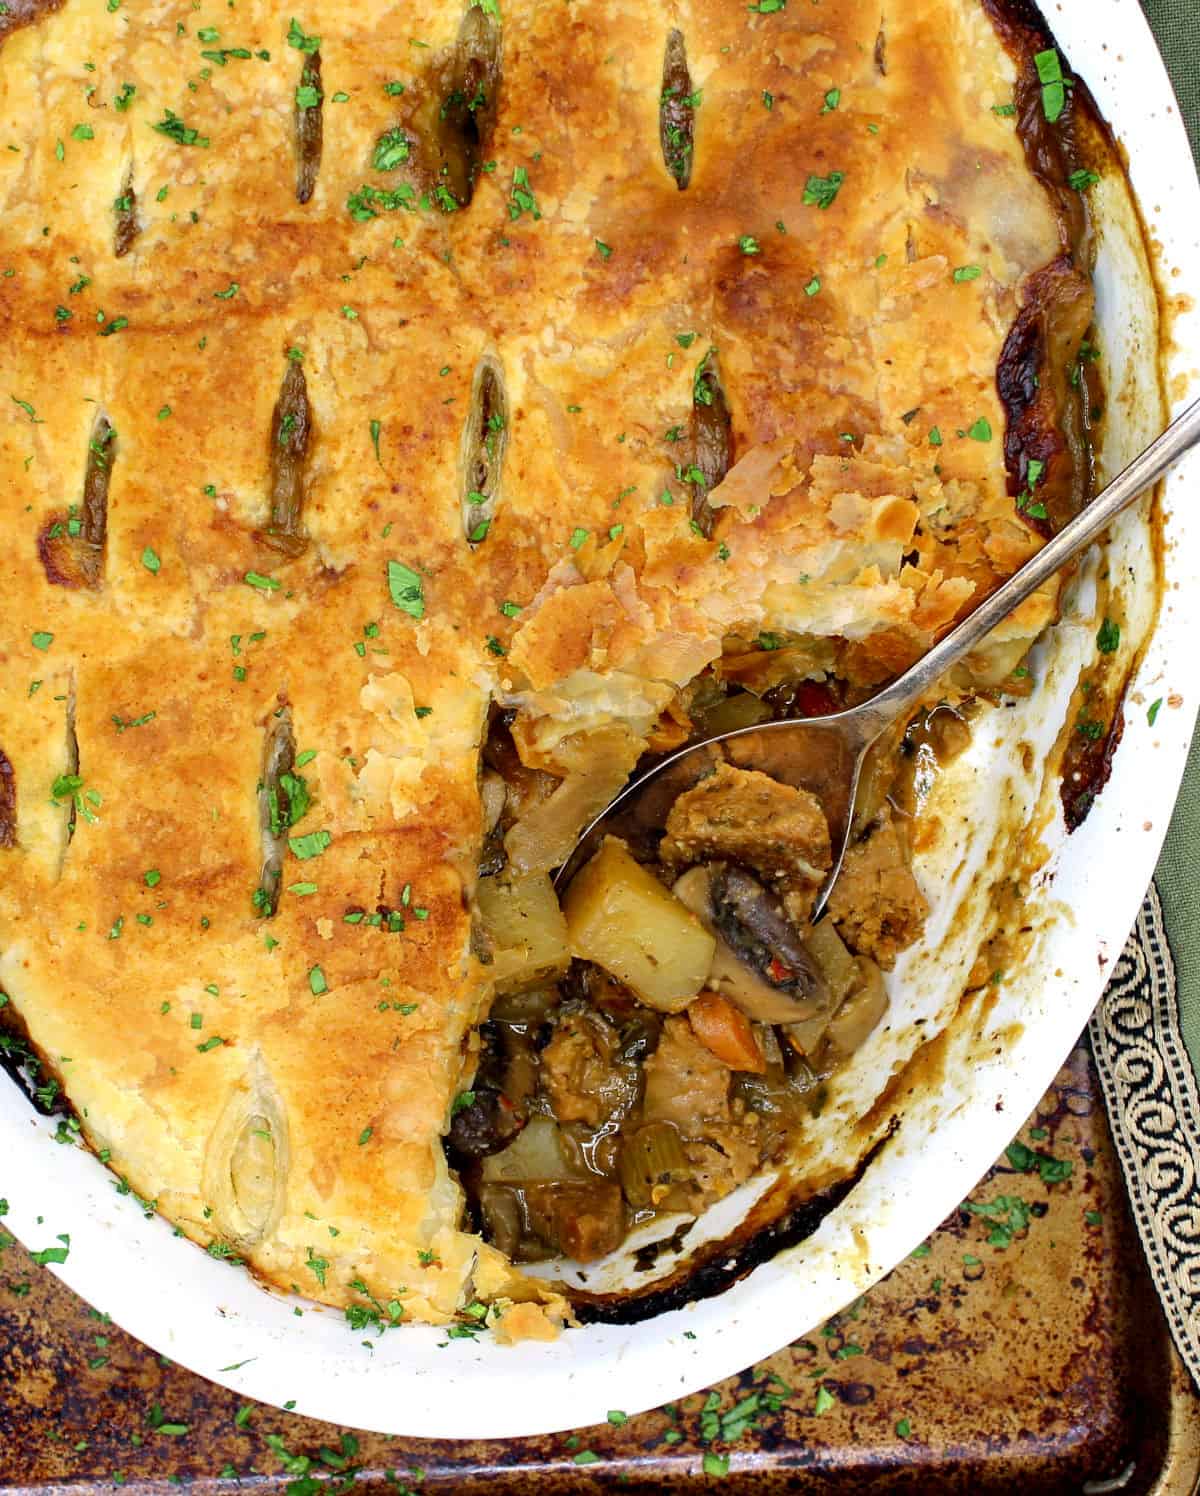 An oval white baking dish with a vegan pot pie that has a flaky golden crust made of puff pastry, with a filling of potatoes, mushrooms, carrots, onions, herbs and sausage on a baking sheet with a green napkin